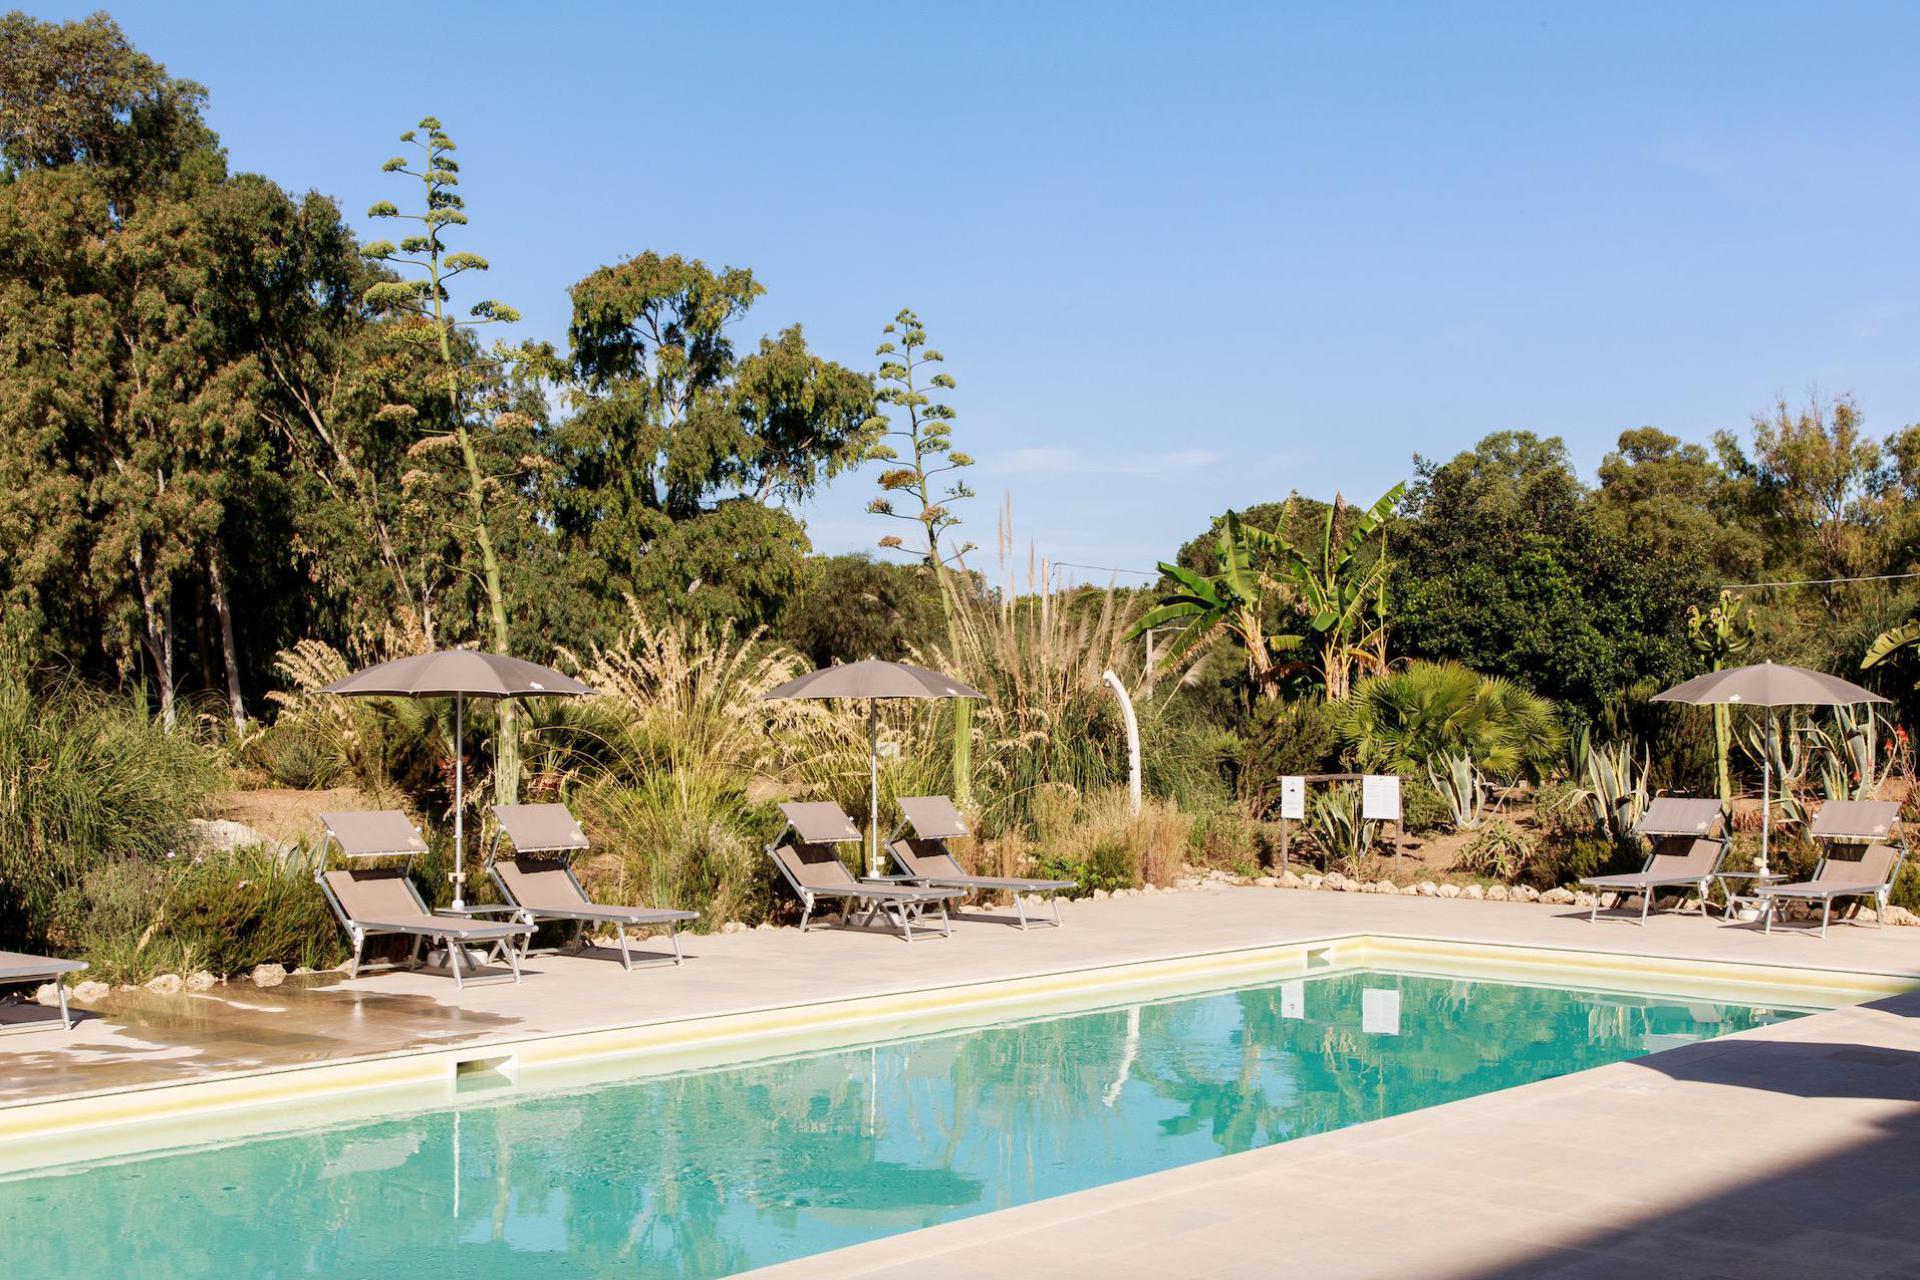 Agriturismo Sicily Family residence within walking distance from the sea